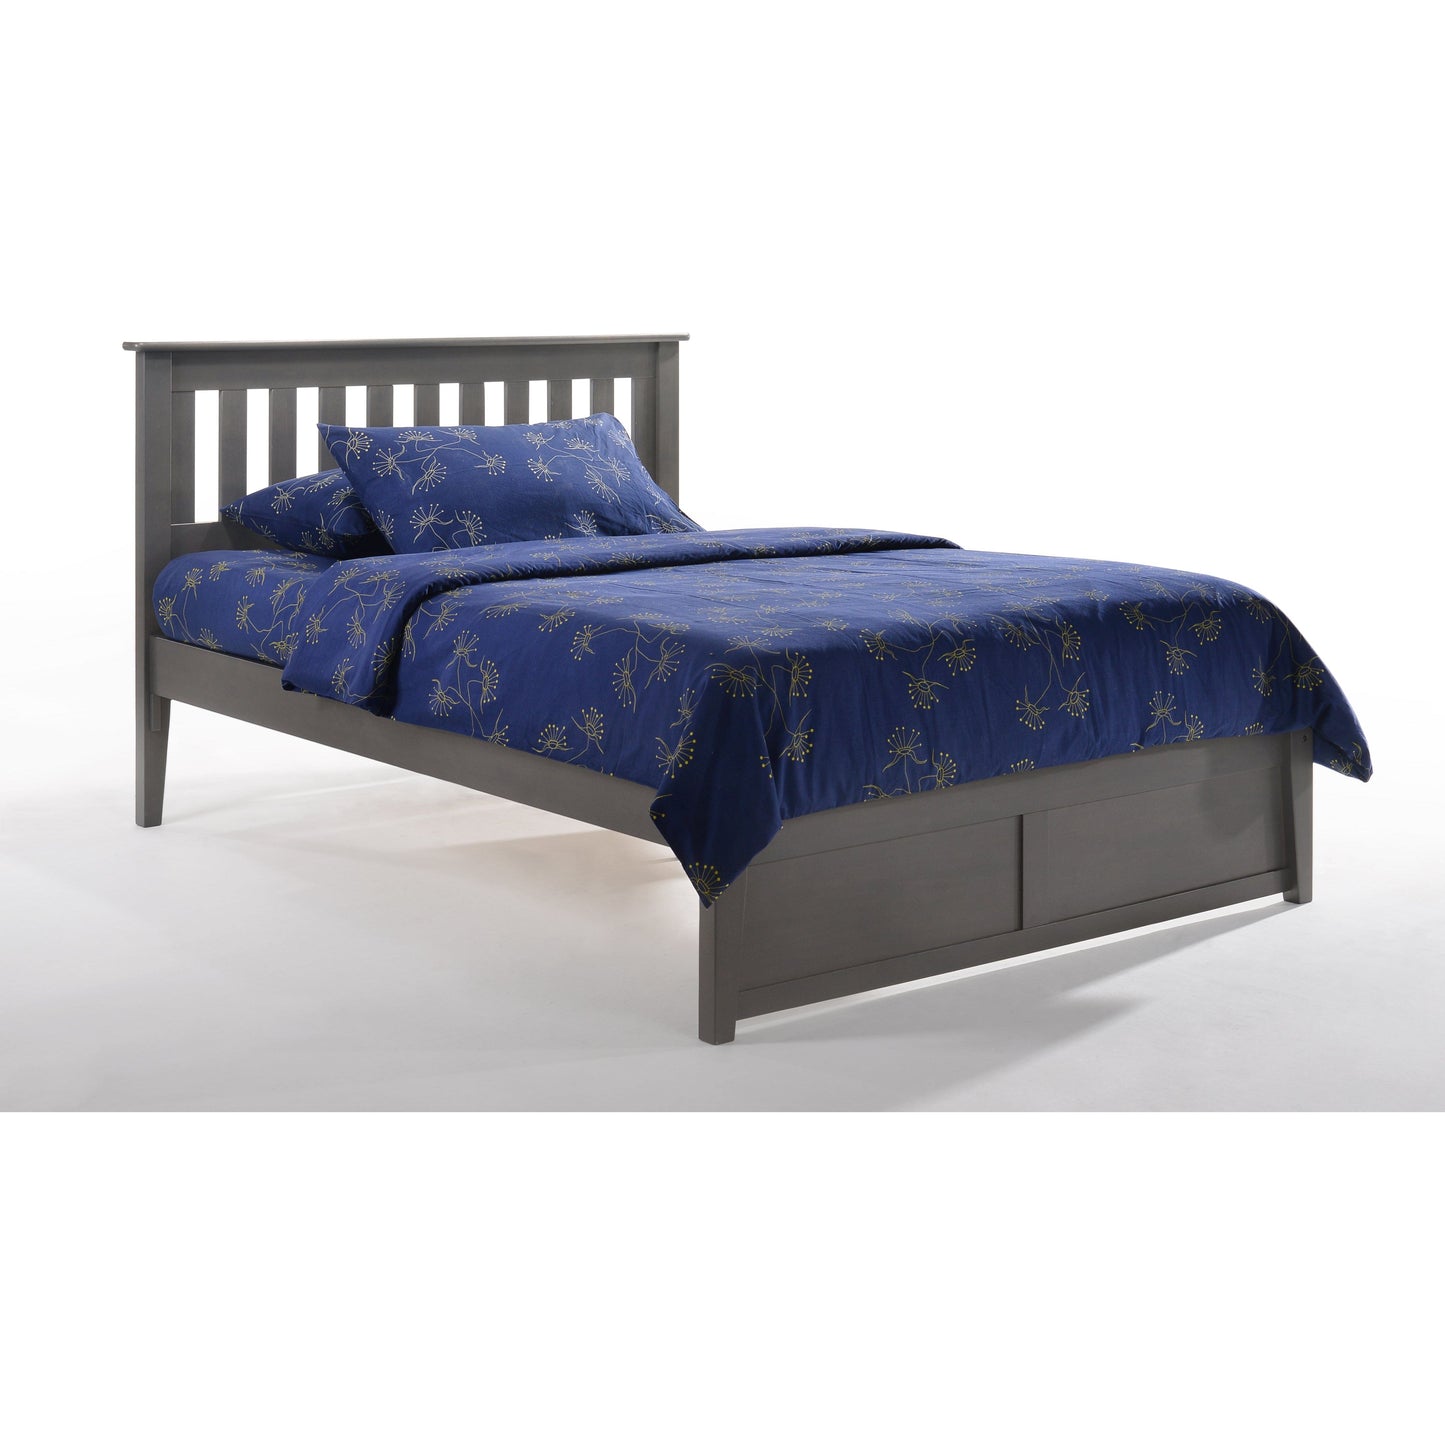 Night And Day King Rosemary Bed (P Series) in stonewash finish RMY-KH-EKG-COM-P-STW